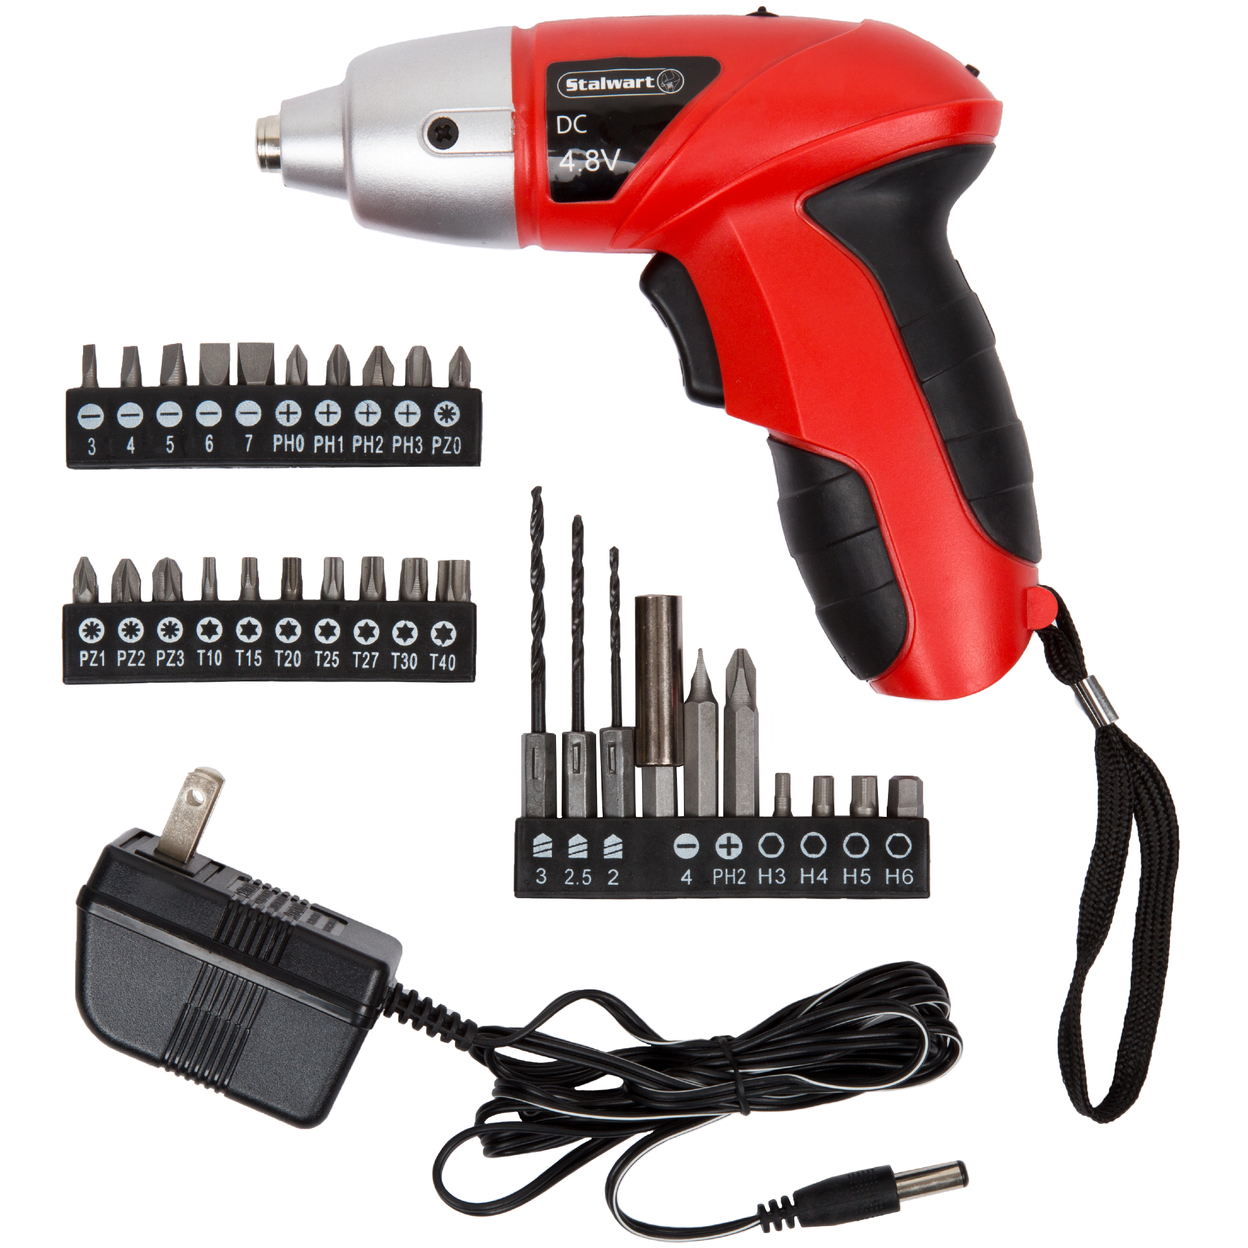 25 Pc 4.8V Cordless Screwdriver With LED Work Light Home Use Rechargeable